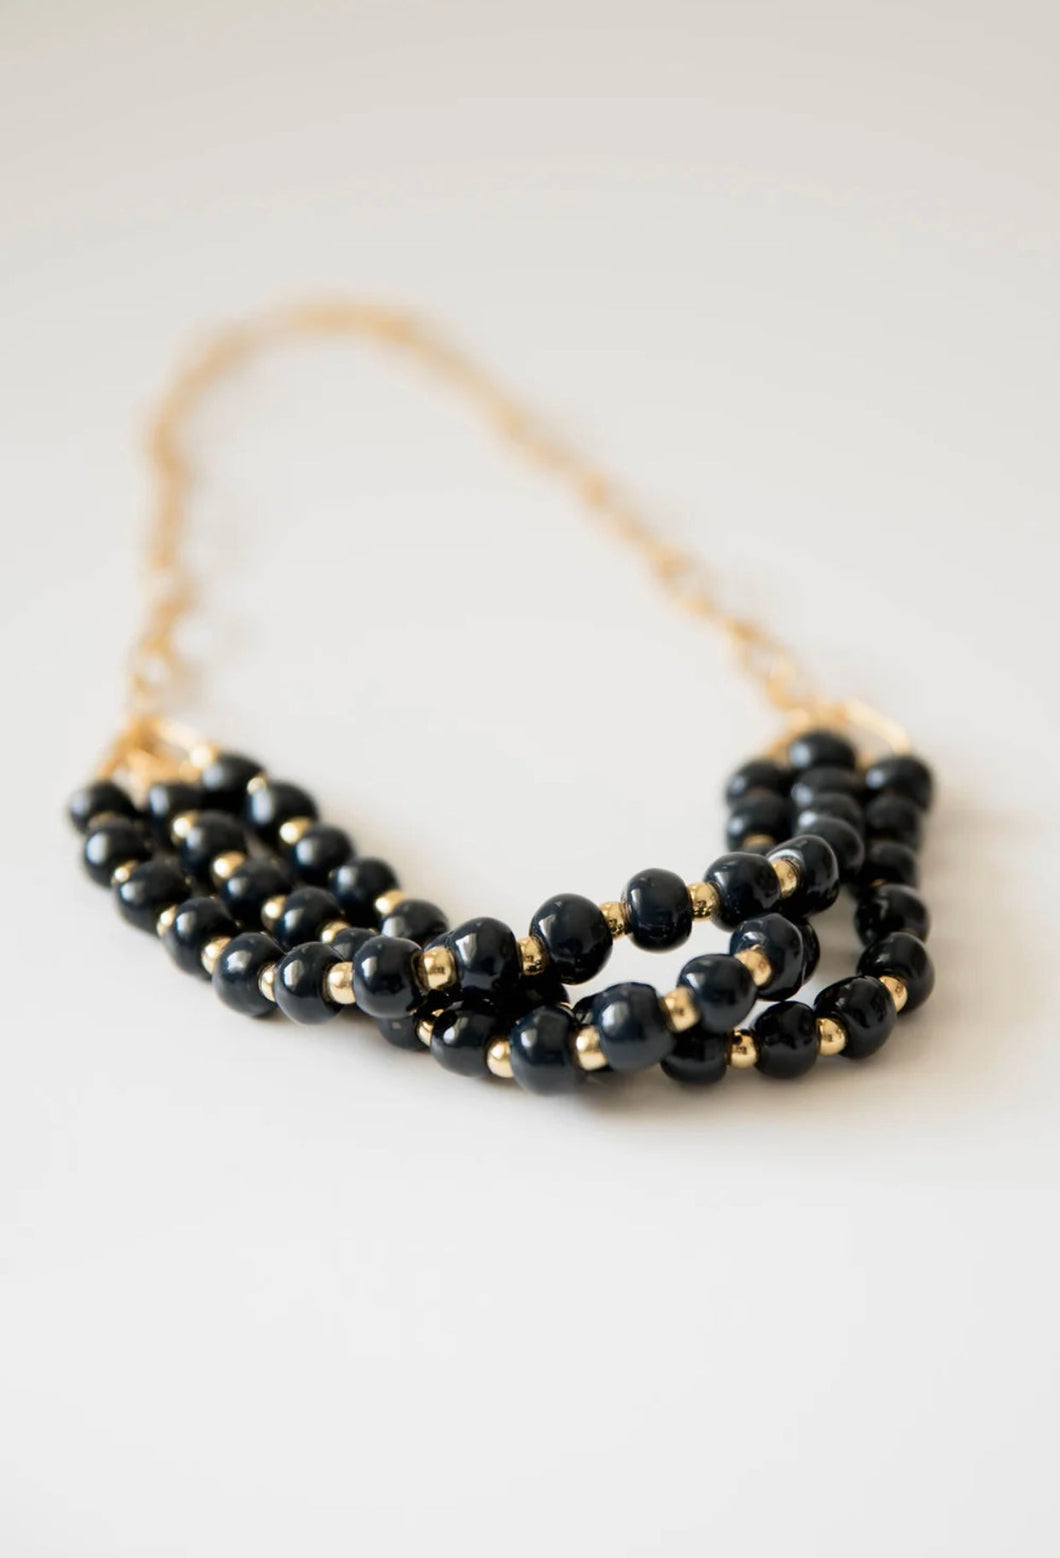 Bel Koz Gold Triple Twist Clay Necklace - FRENCH NAVY - Link in description to purchase at Betsey's